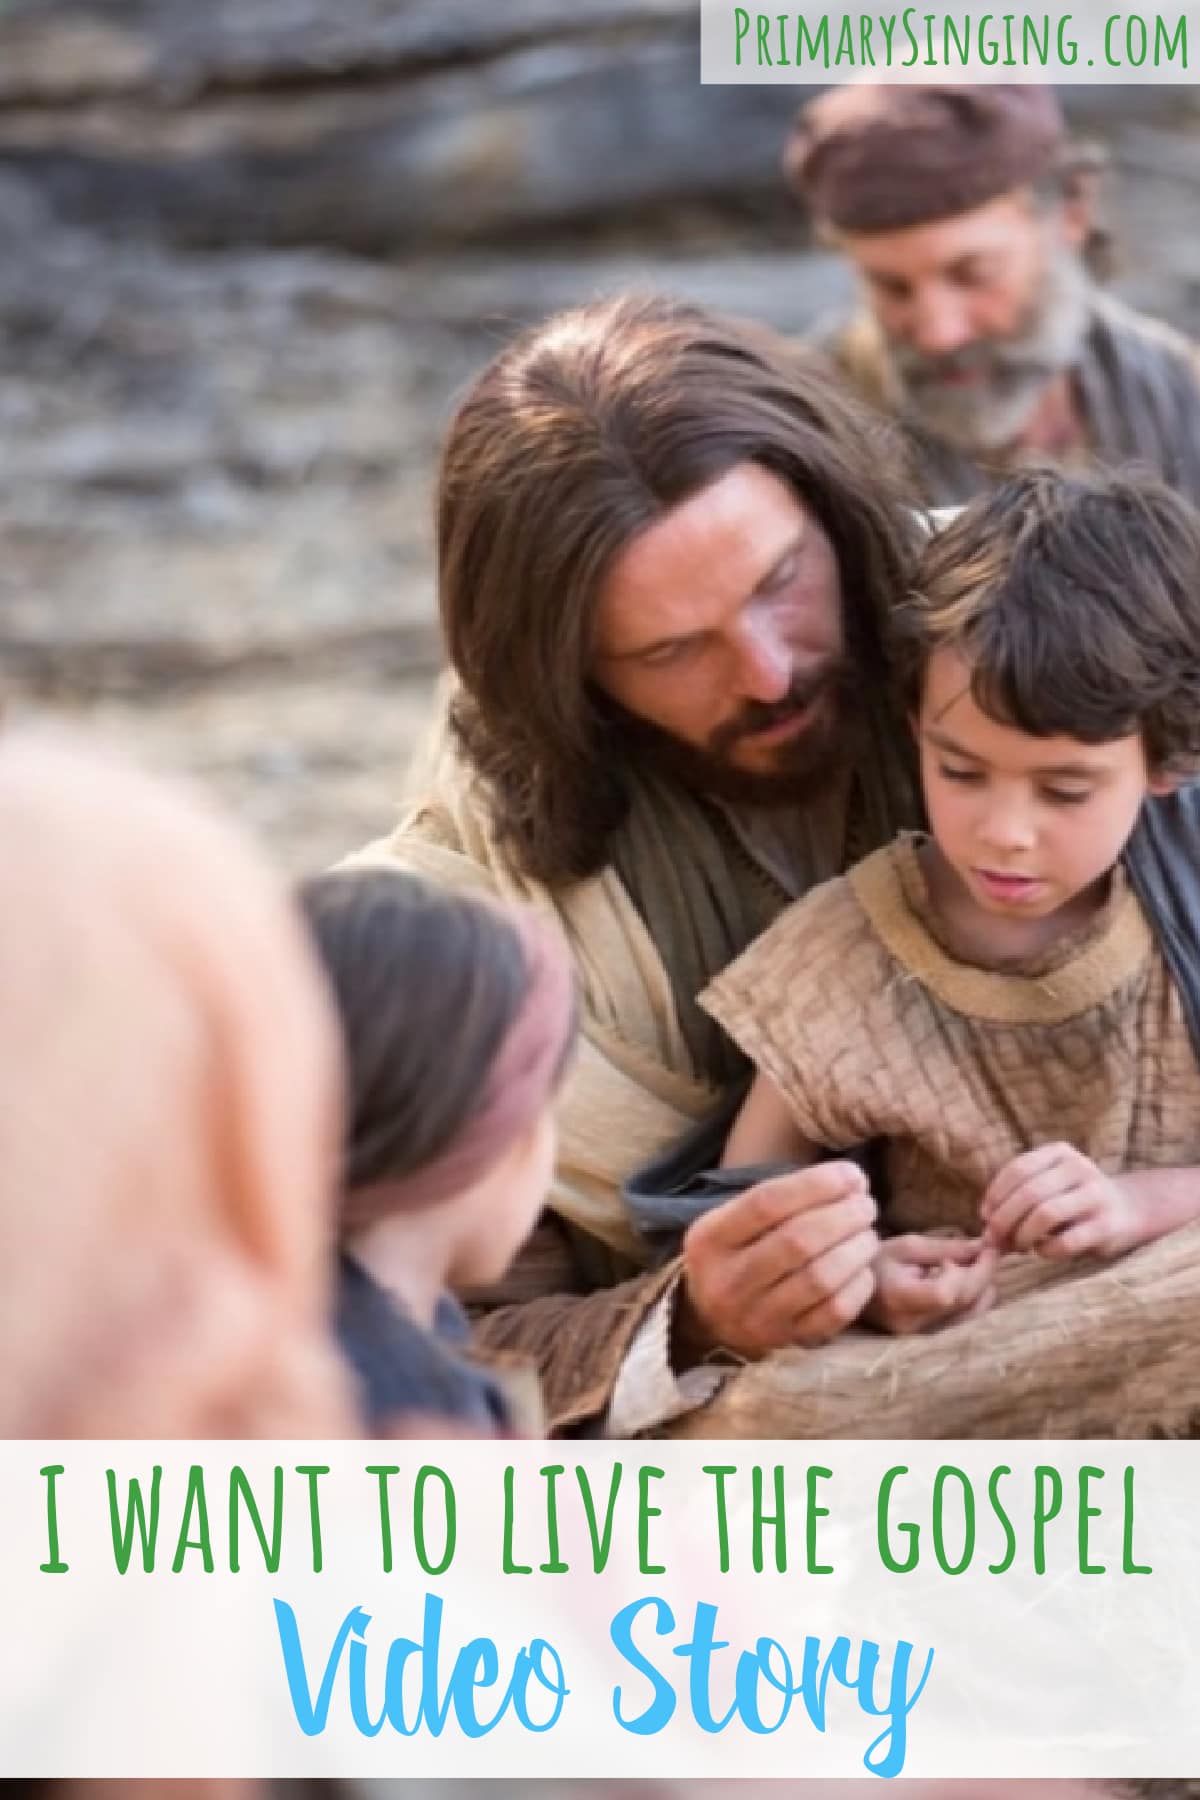 You will love this sweet I Want to Live the Gospel Video Story lesson. There are many examples from the Book of Mormon of prophets trying to live the gospel by following the Lord. Share one of these videos in primary singing time as you introduce this new song! #LDS #Primary #Singingtime #Musicleader 